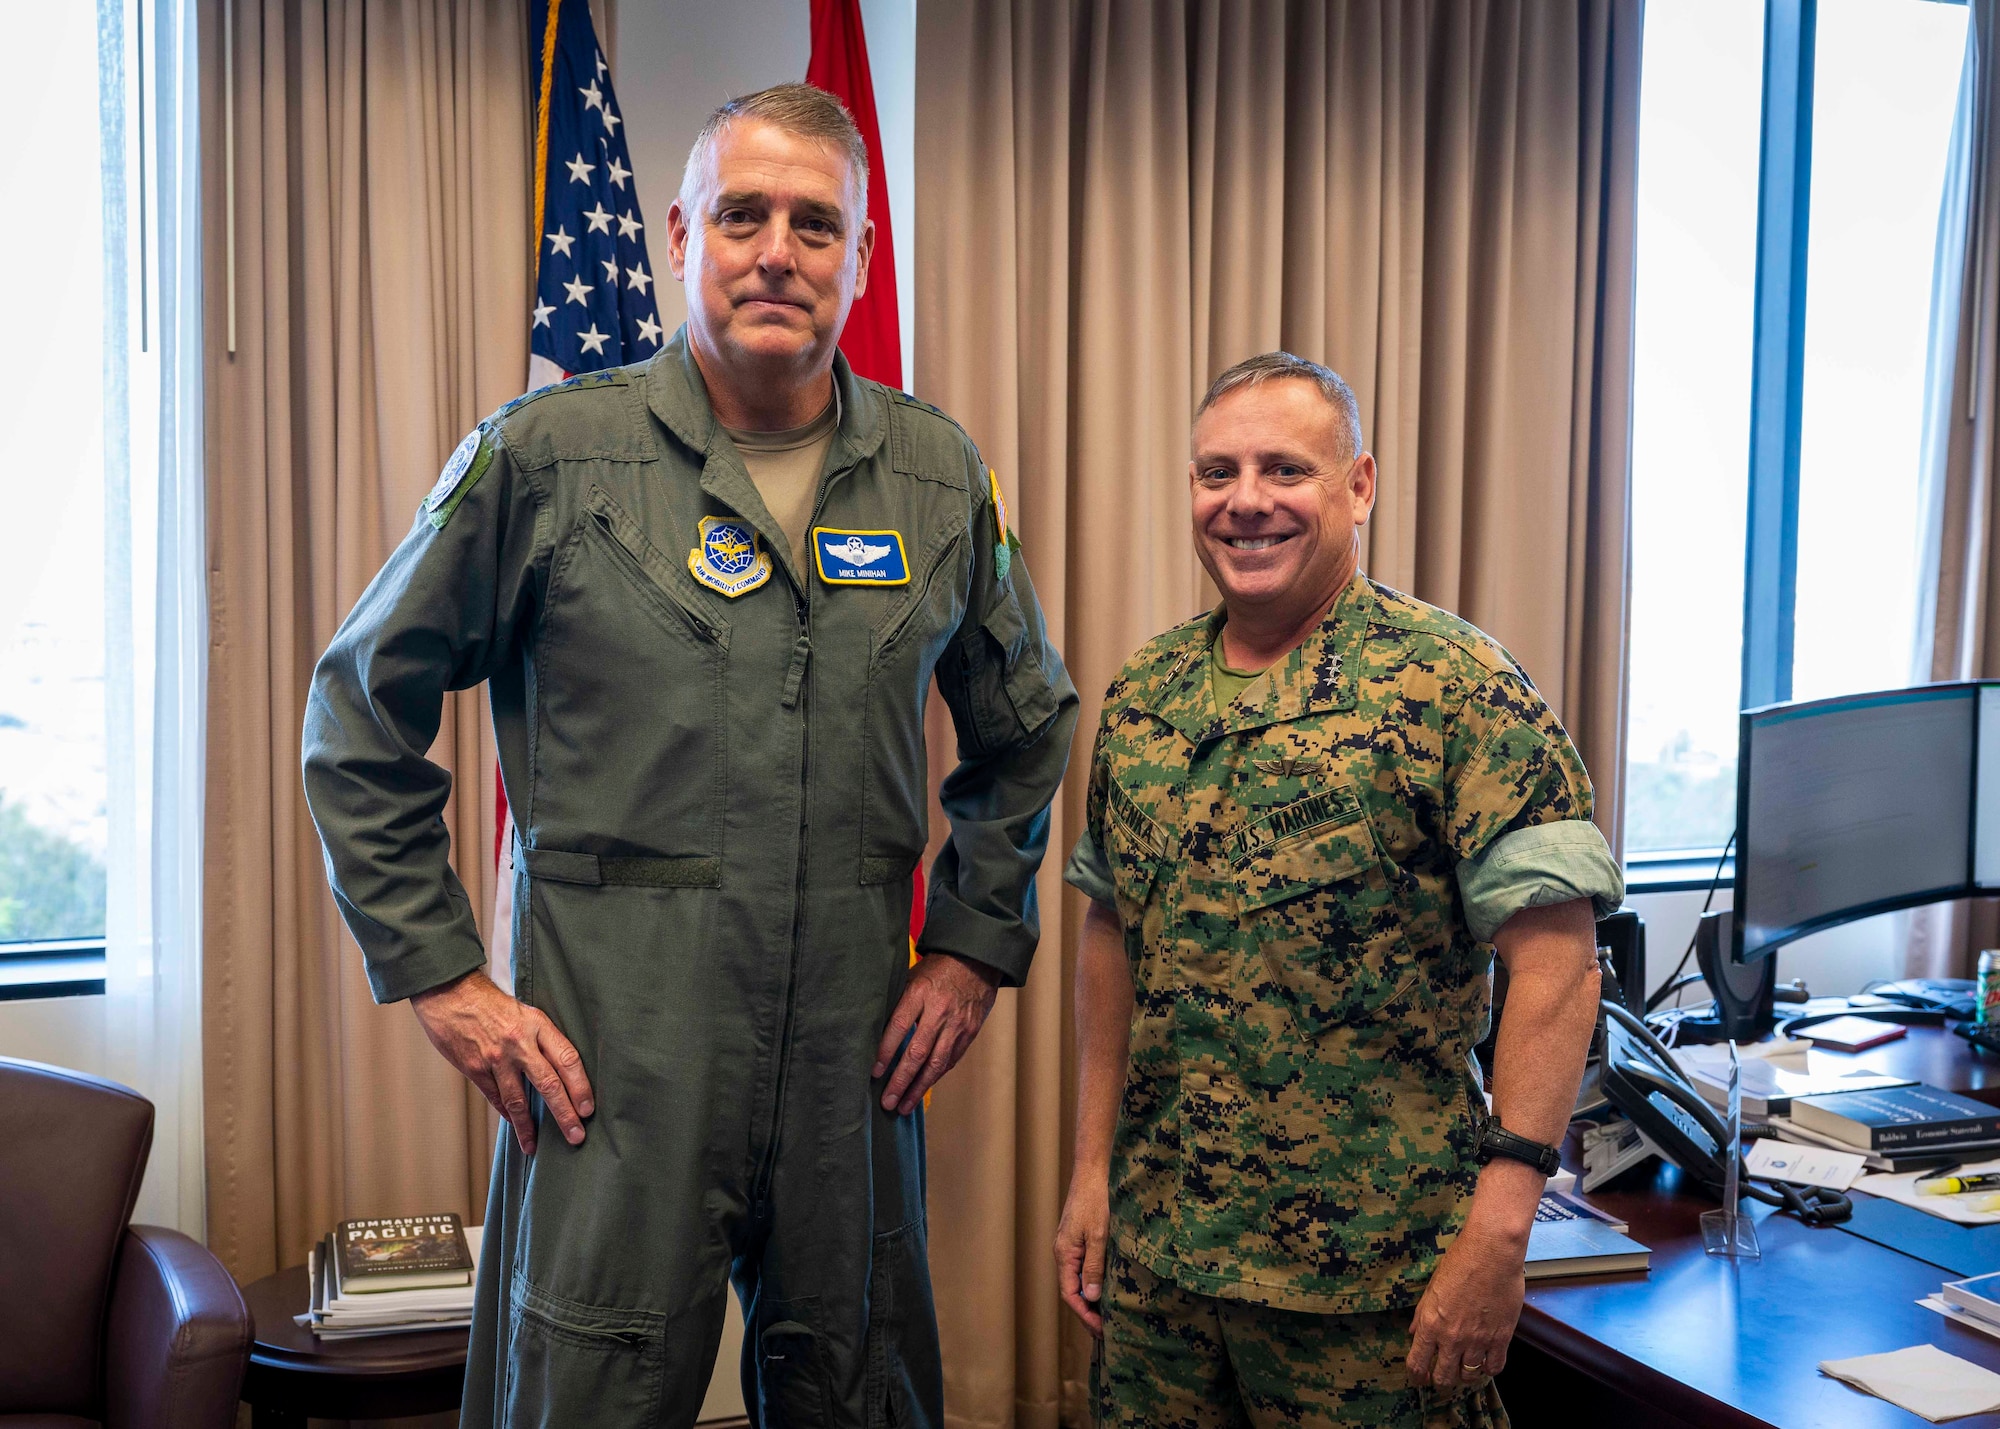 CAMP H.M. SMITH, Hawaii (June 23, 2022) Gen. Michael Minihan, Commander of Air Mobility Command, left, and Lt. Gen. Stephen D. Sklenka, Deputy Commander of U.S. Indo-Pacific Command, pose for a photo during a meeting at USINDOPACOM headquarters. AMC leaders met with USINDOPACOM as well as their Pacific Air Forces counterparts to present a road map for readying Mobility Air Forces for Agile Combat Employment in the Indo-Pacific theater.(U.S. Navy photo by Mass Communication Specialist 1st Class Anthony J. Rivera)